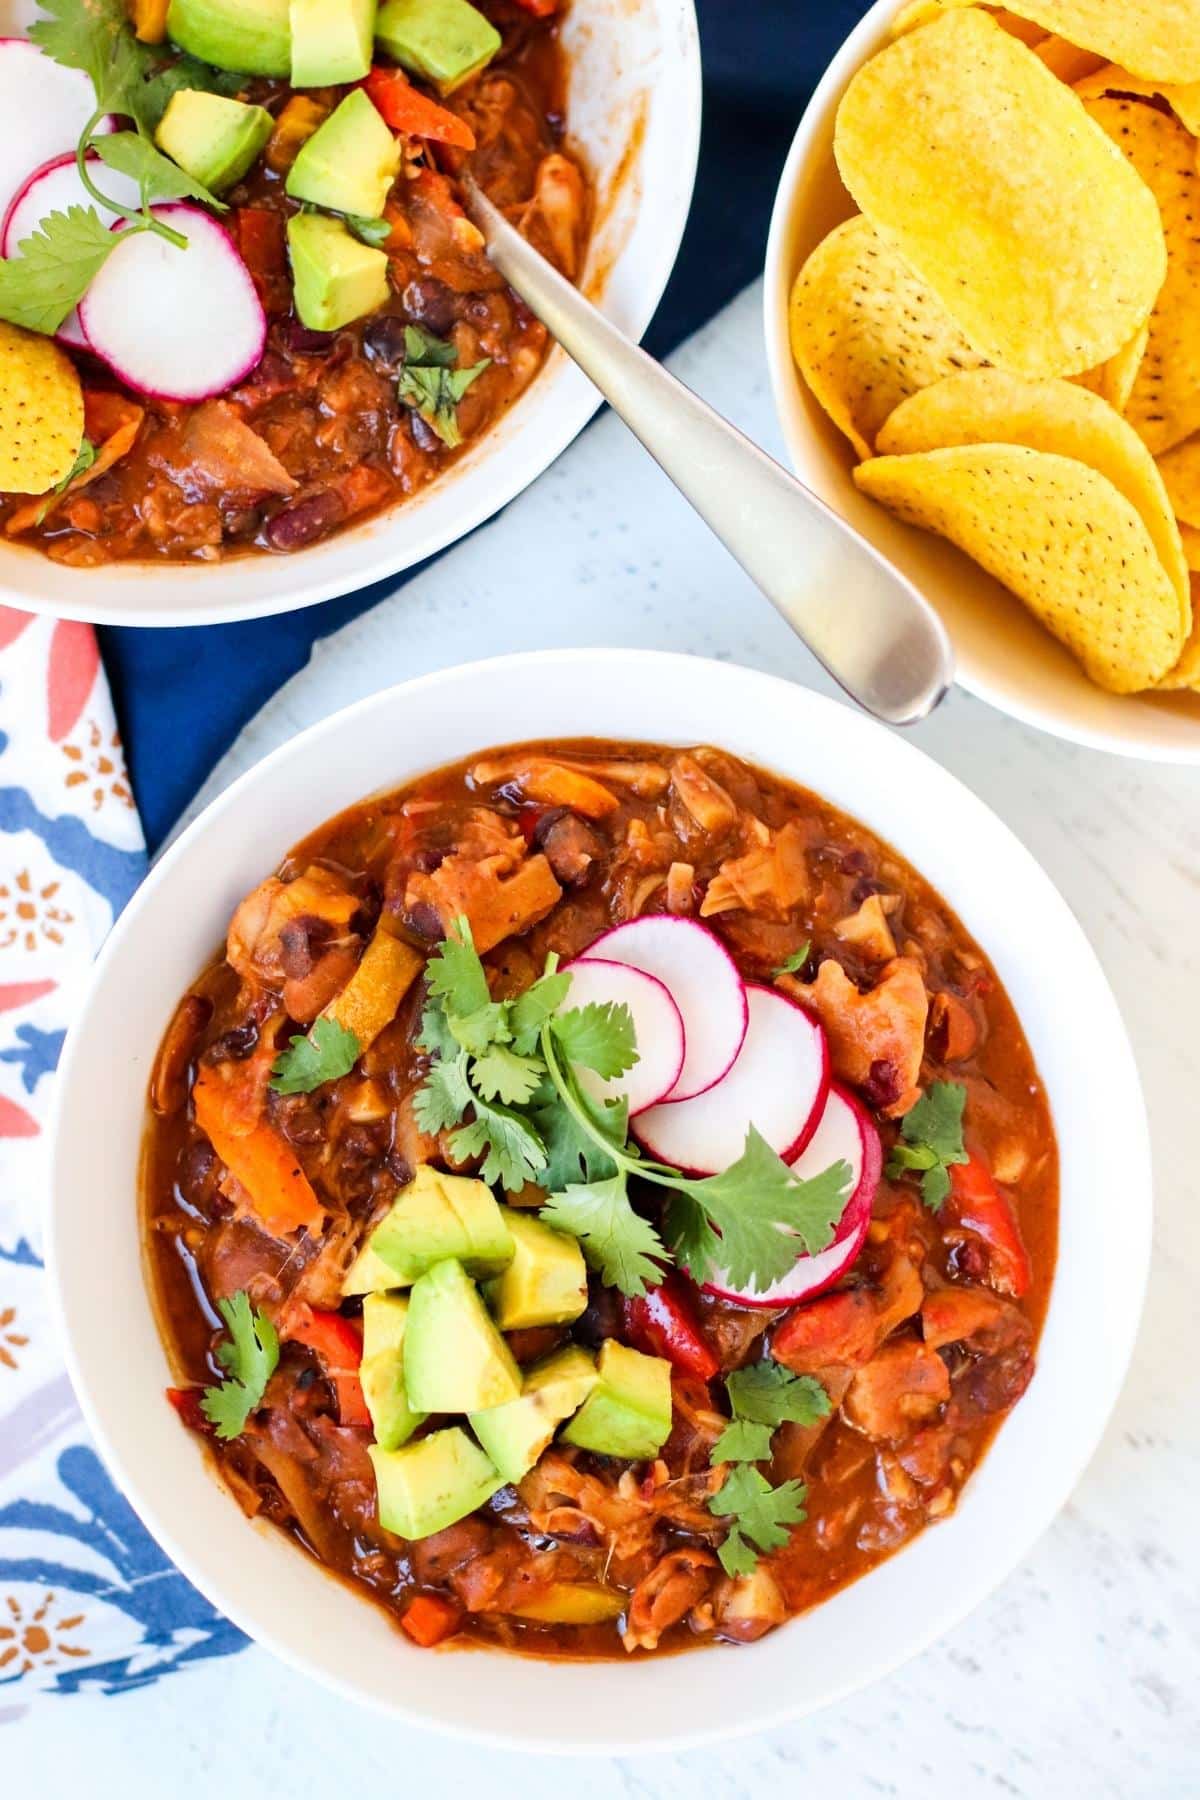 Bowls of jackfruit chili topped with avocado, cilantro, and radish slices and bowl or tortilla chips.